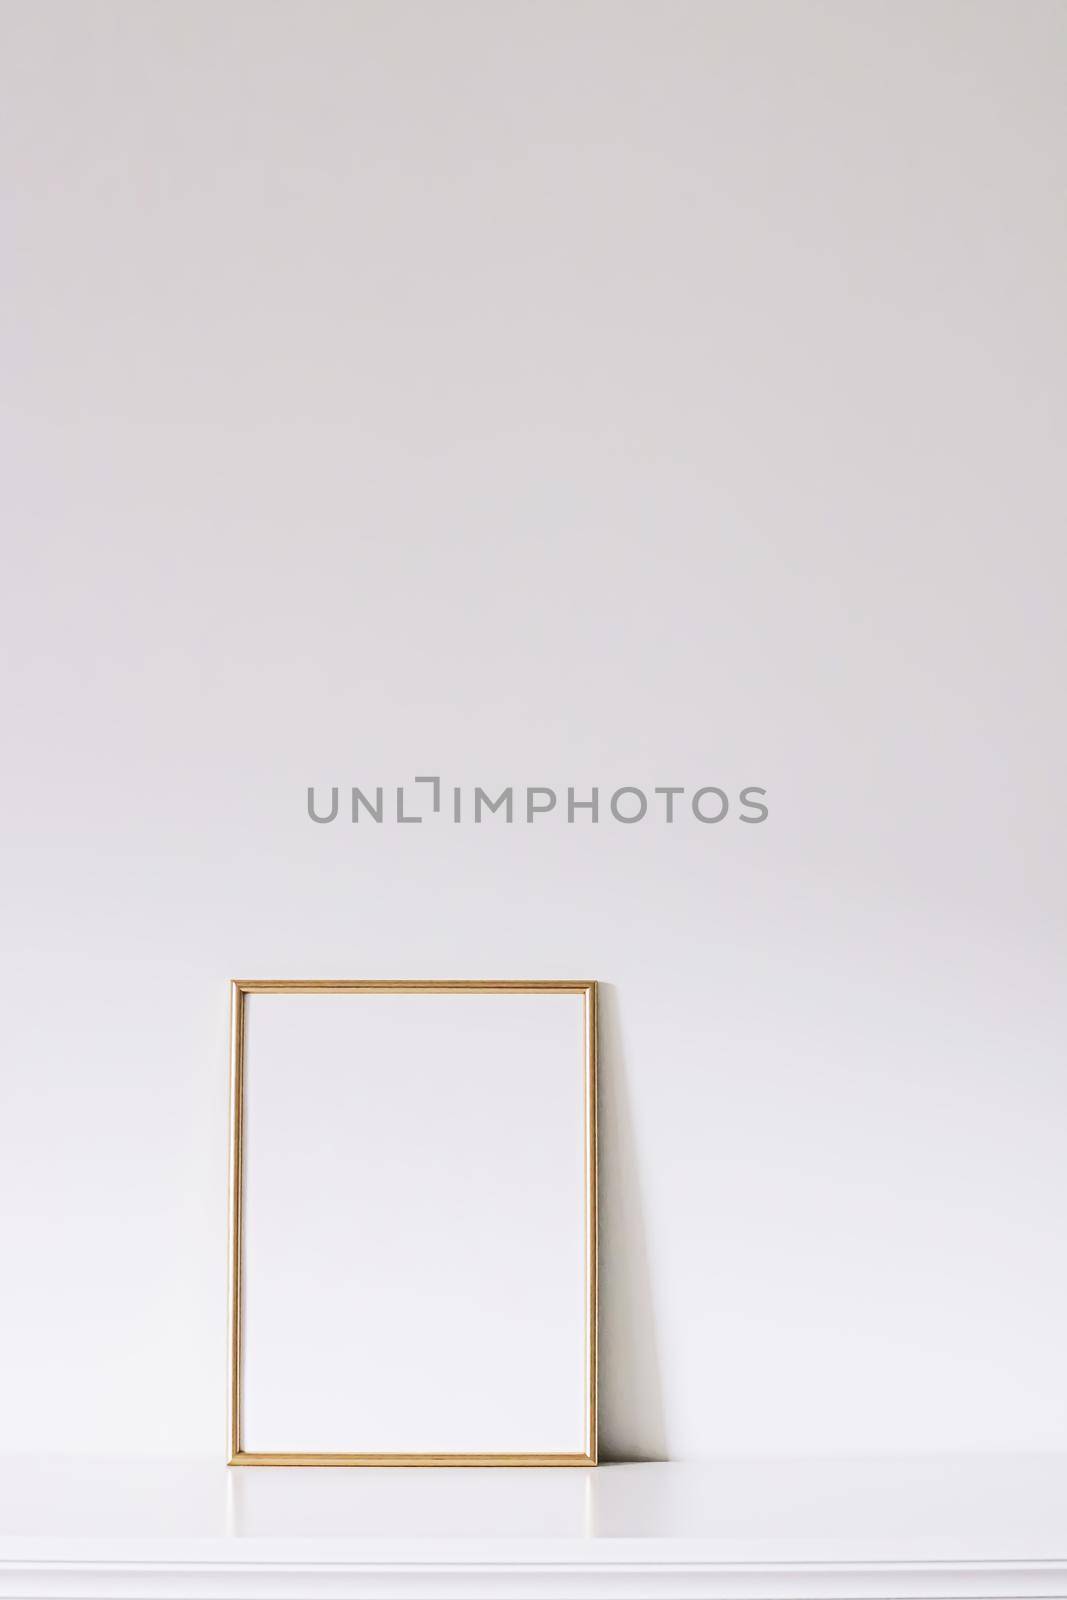 Golden vertical frame on white furniture, luxury home decor and design for mockup creations